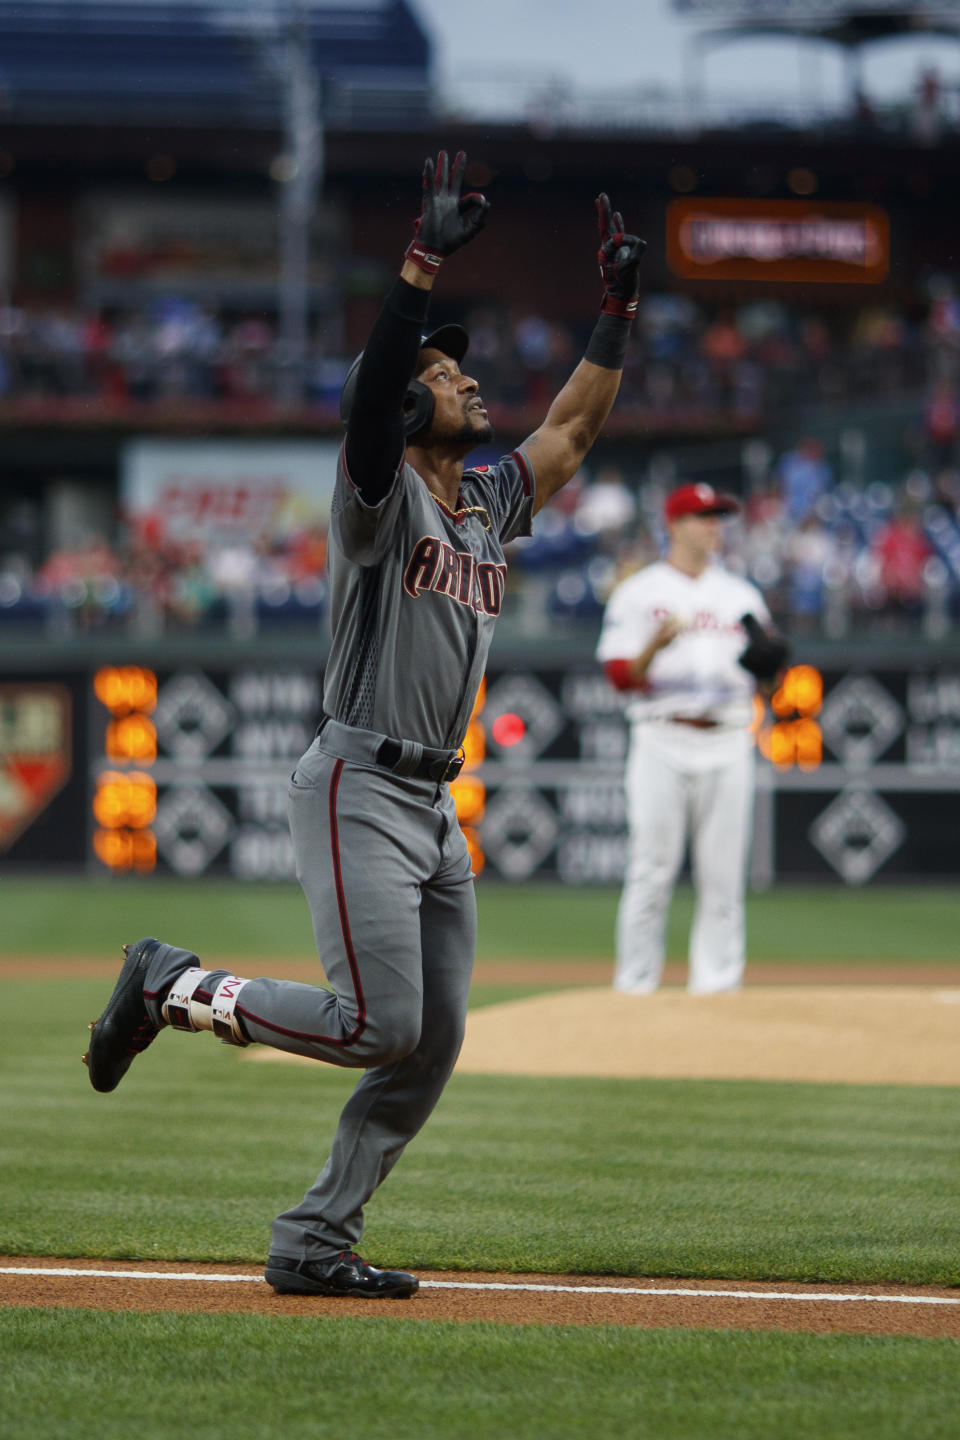 Arizona Diamondbacks' Jarrod Dyson, left, reacts as he rounds the bases after hitting a home run off Philadelphia Phillies starting pitcher Jerad Eickhoff during the first inning of a baseball game, Monday, June 10, 2019, in Philadelphia. (AP Photo/Matt Slocum)